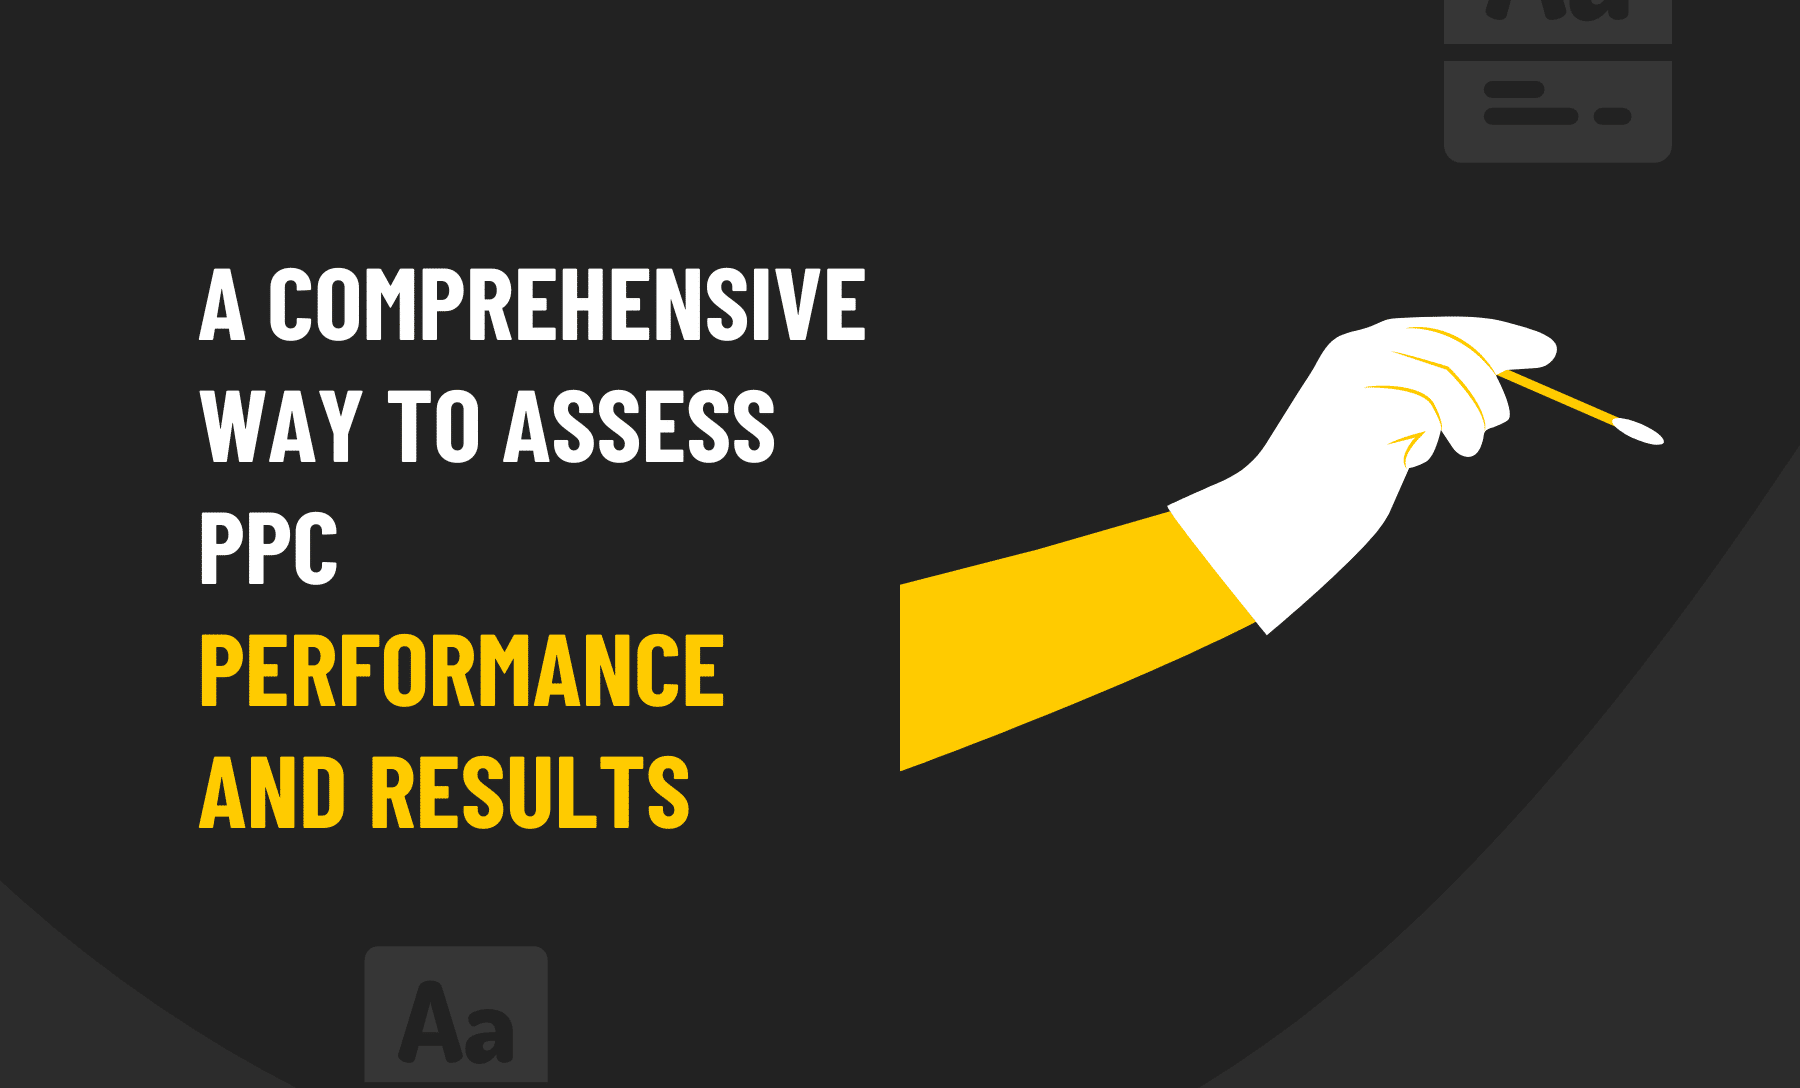 A comprehensive way to assess ppc performance and results